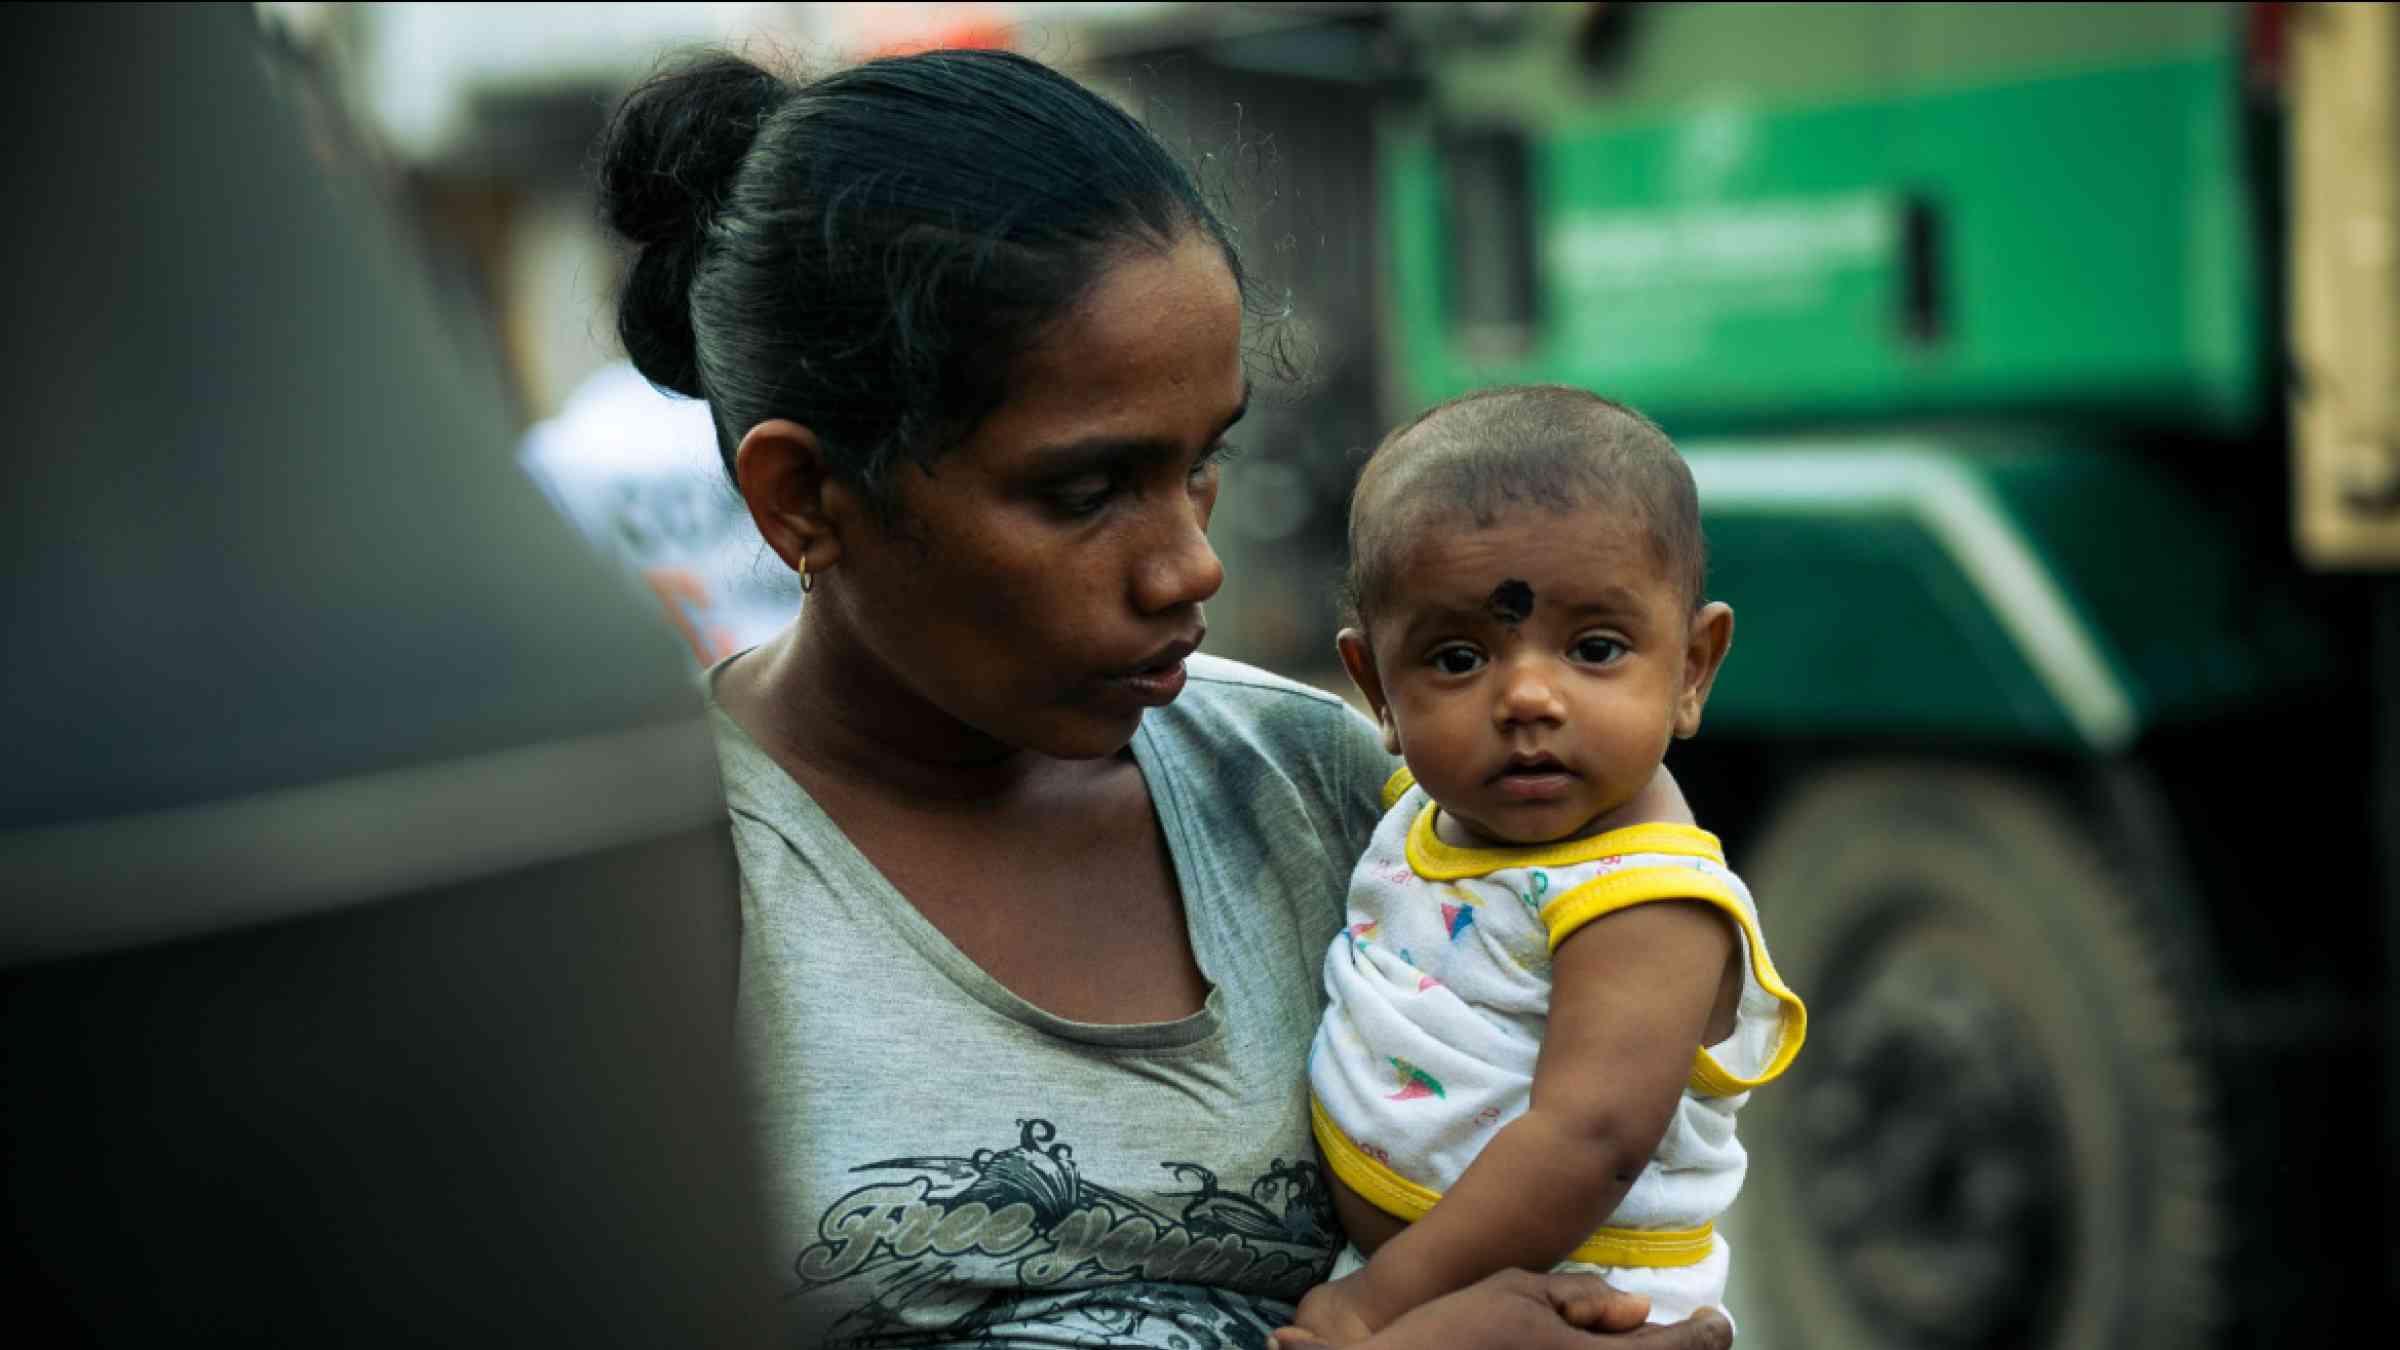 Indian woman with her child on the street New Delhi